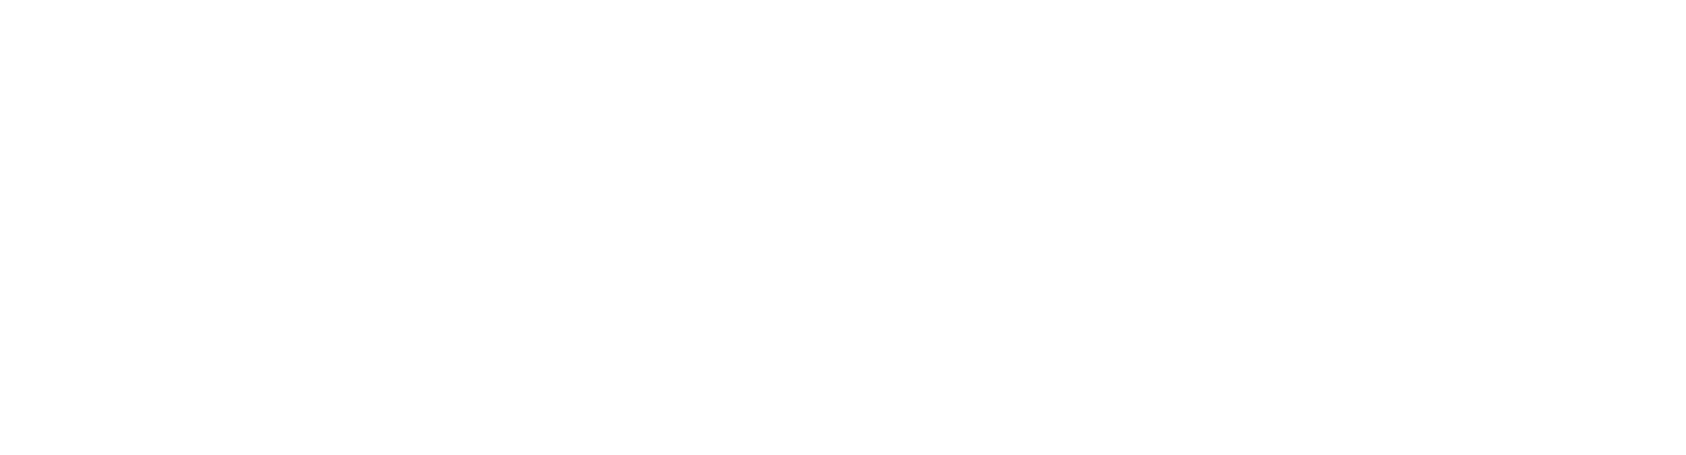 New PayPal Logo - Say hello to the new age of payment tech